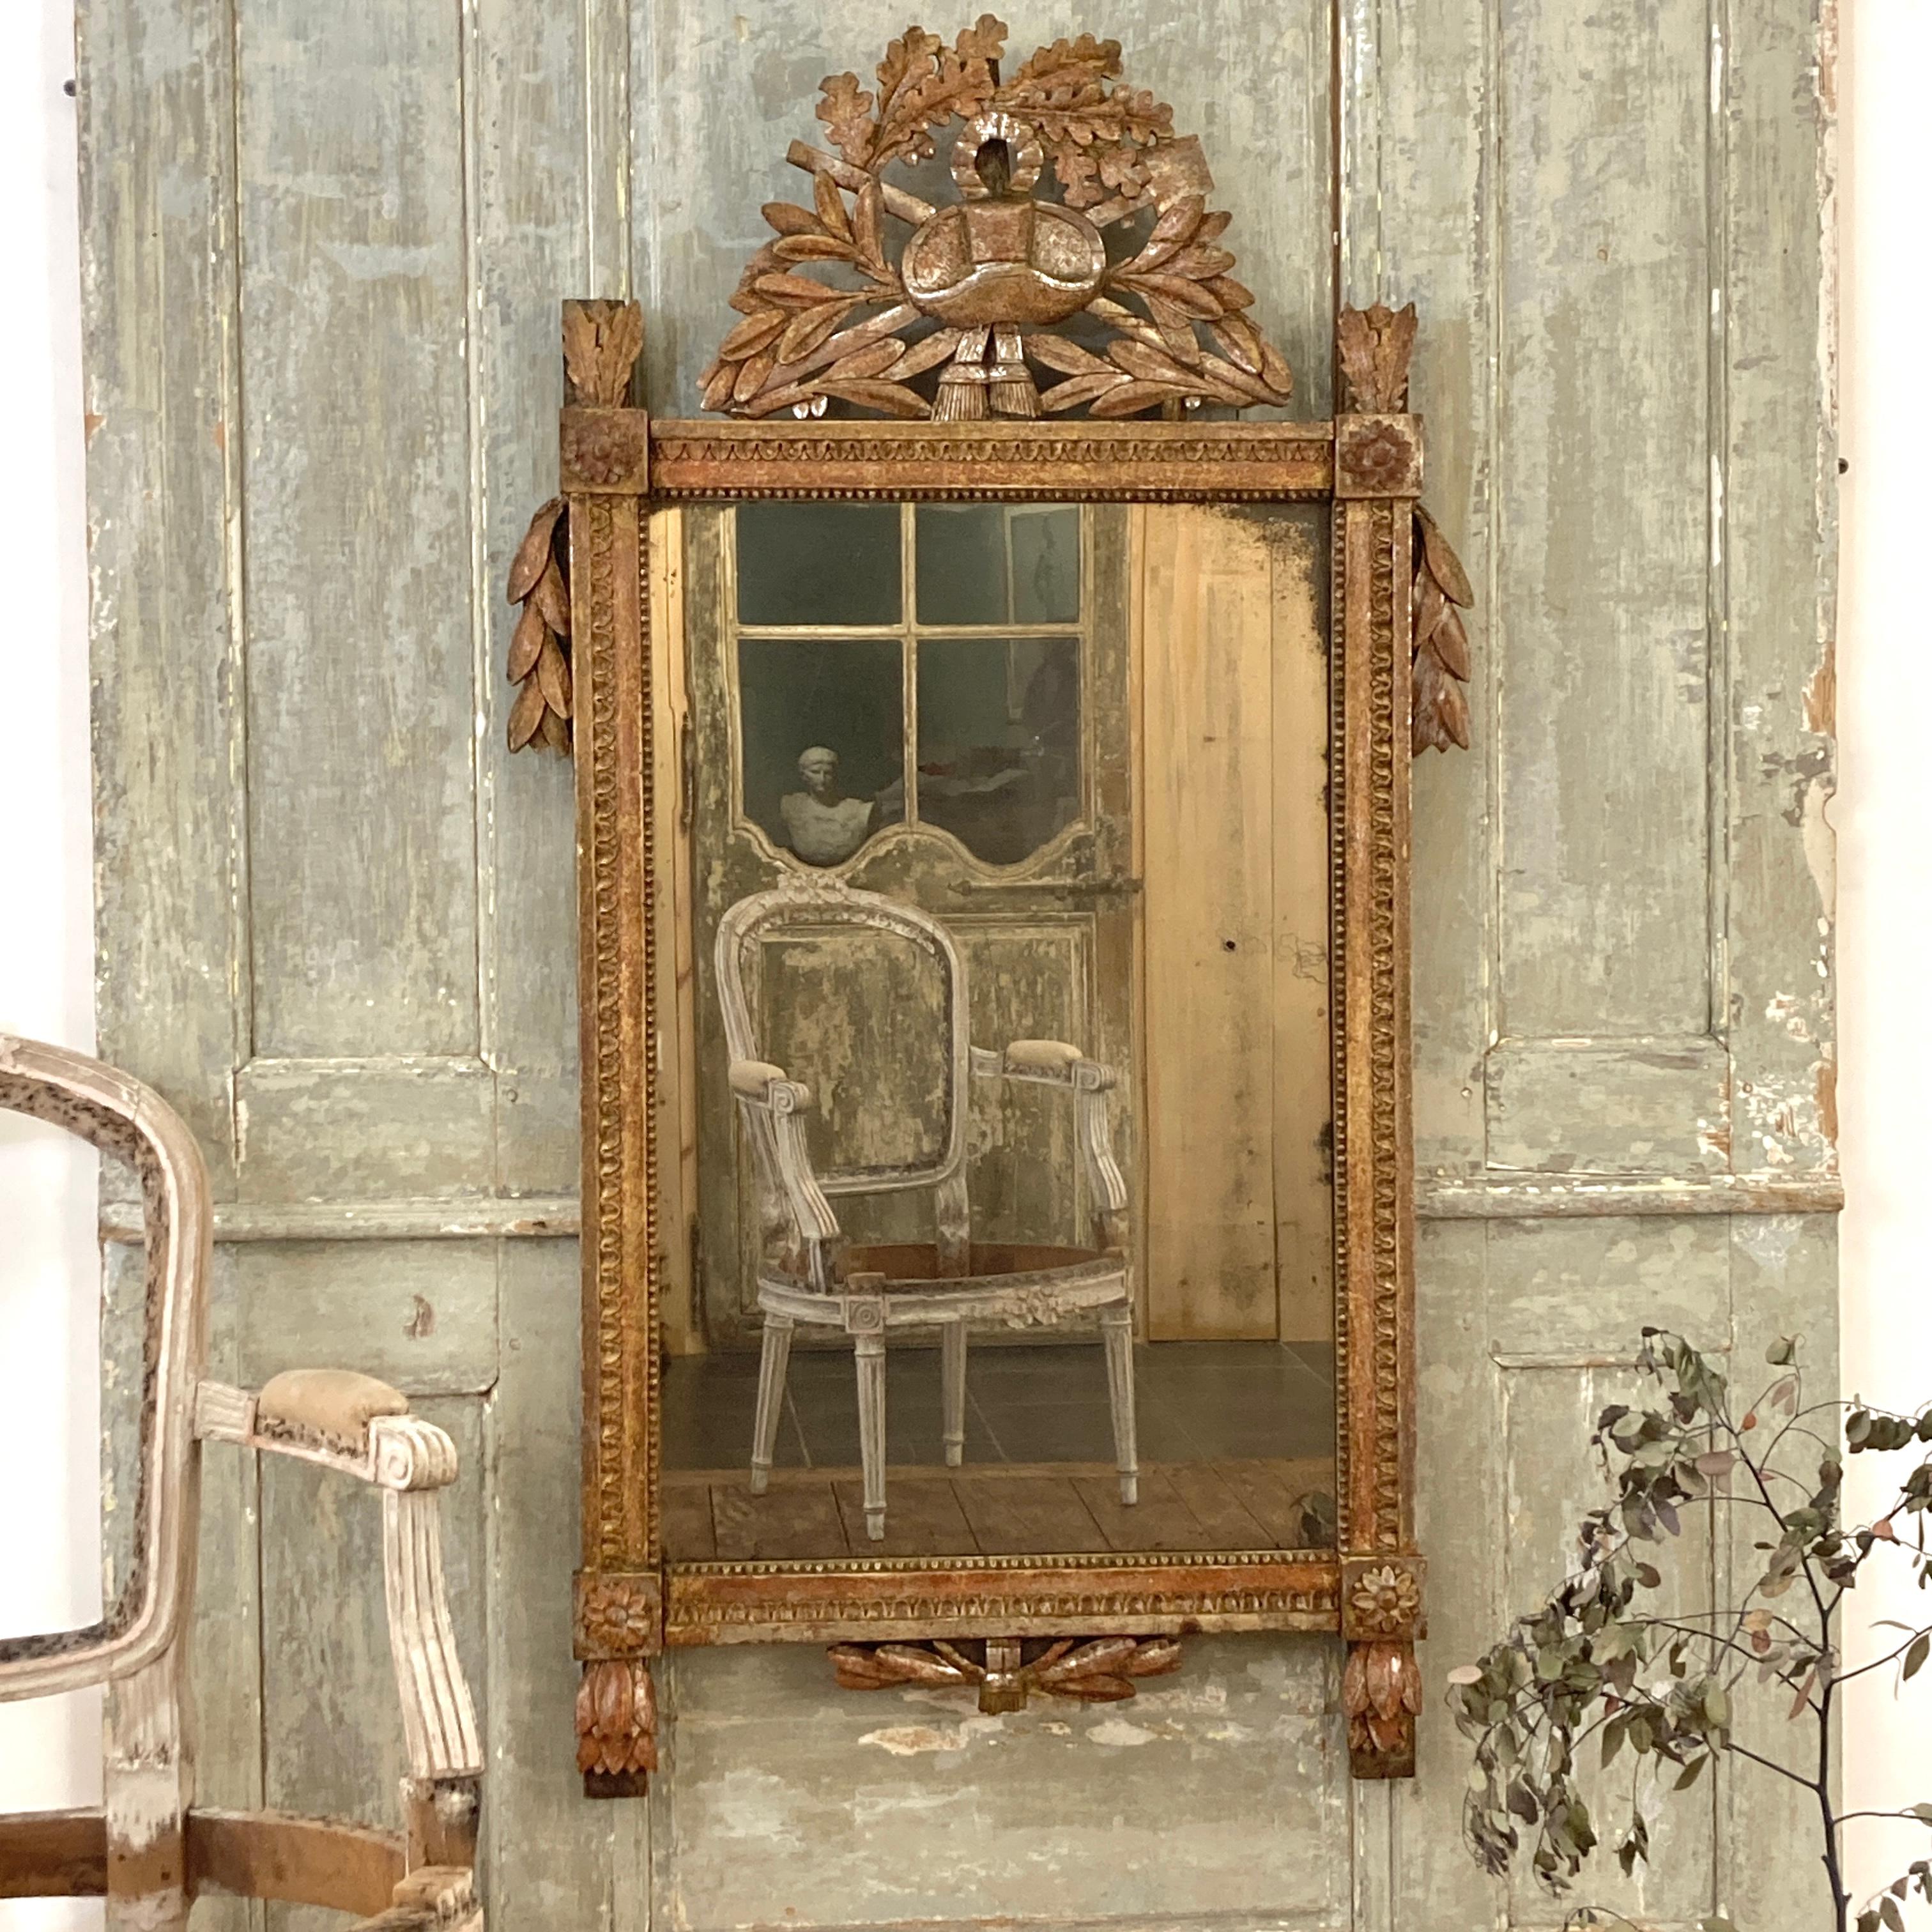 A French Louis XVI period giltwood mirror from circa 1790 with carved crest depicting a gardening theme. This French Louis XVI period giltwood mirror, dating back to circa 1790, is a splendid artifact that marries the elegance of giltwood with a